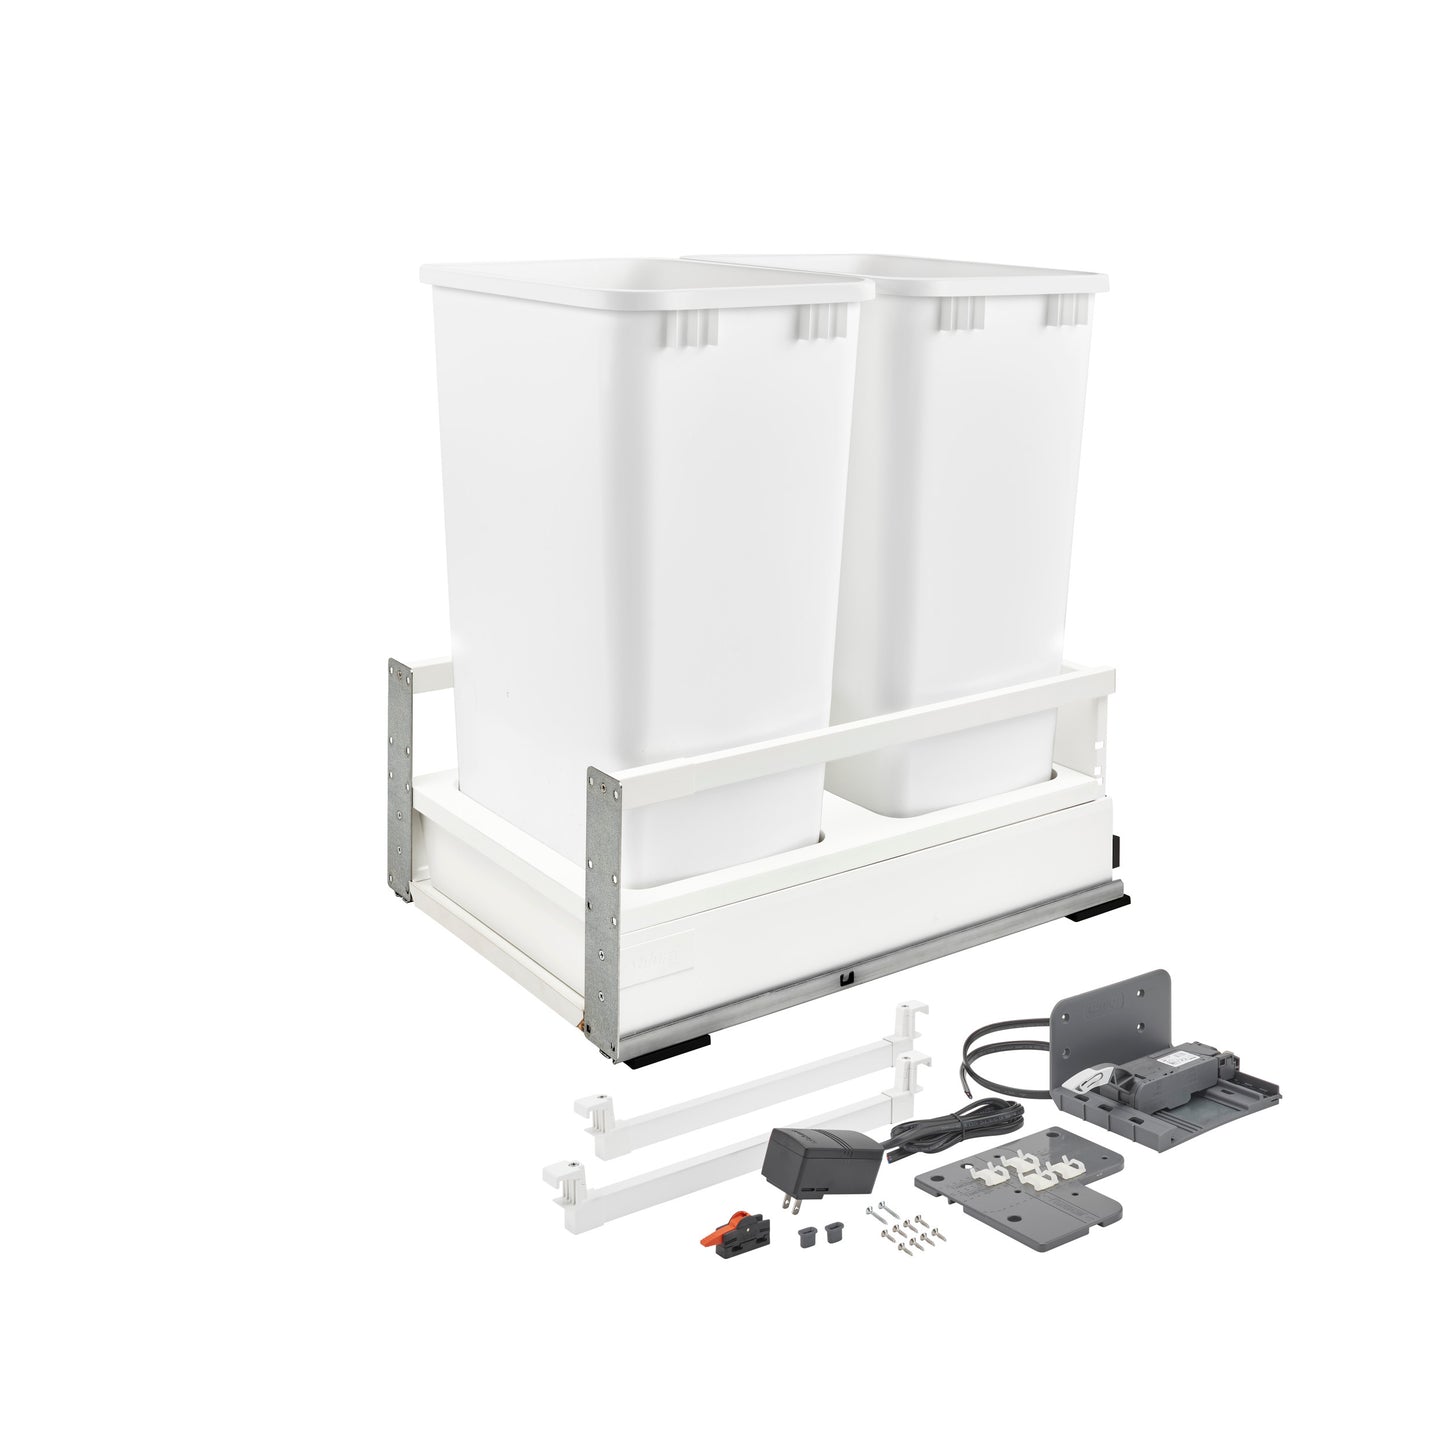 Rev-A-Shelf / TWCSD-1850DM-2 / Tandem Pullout Waste/Trash Container w/ Soft-Close and SERVO-DRIVE System